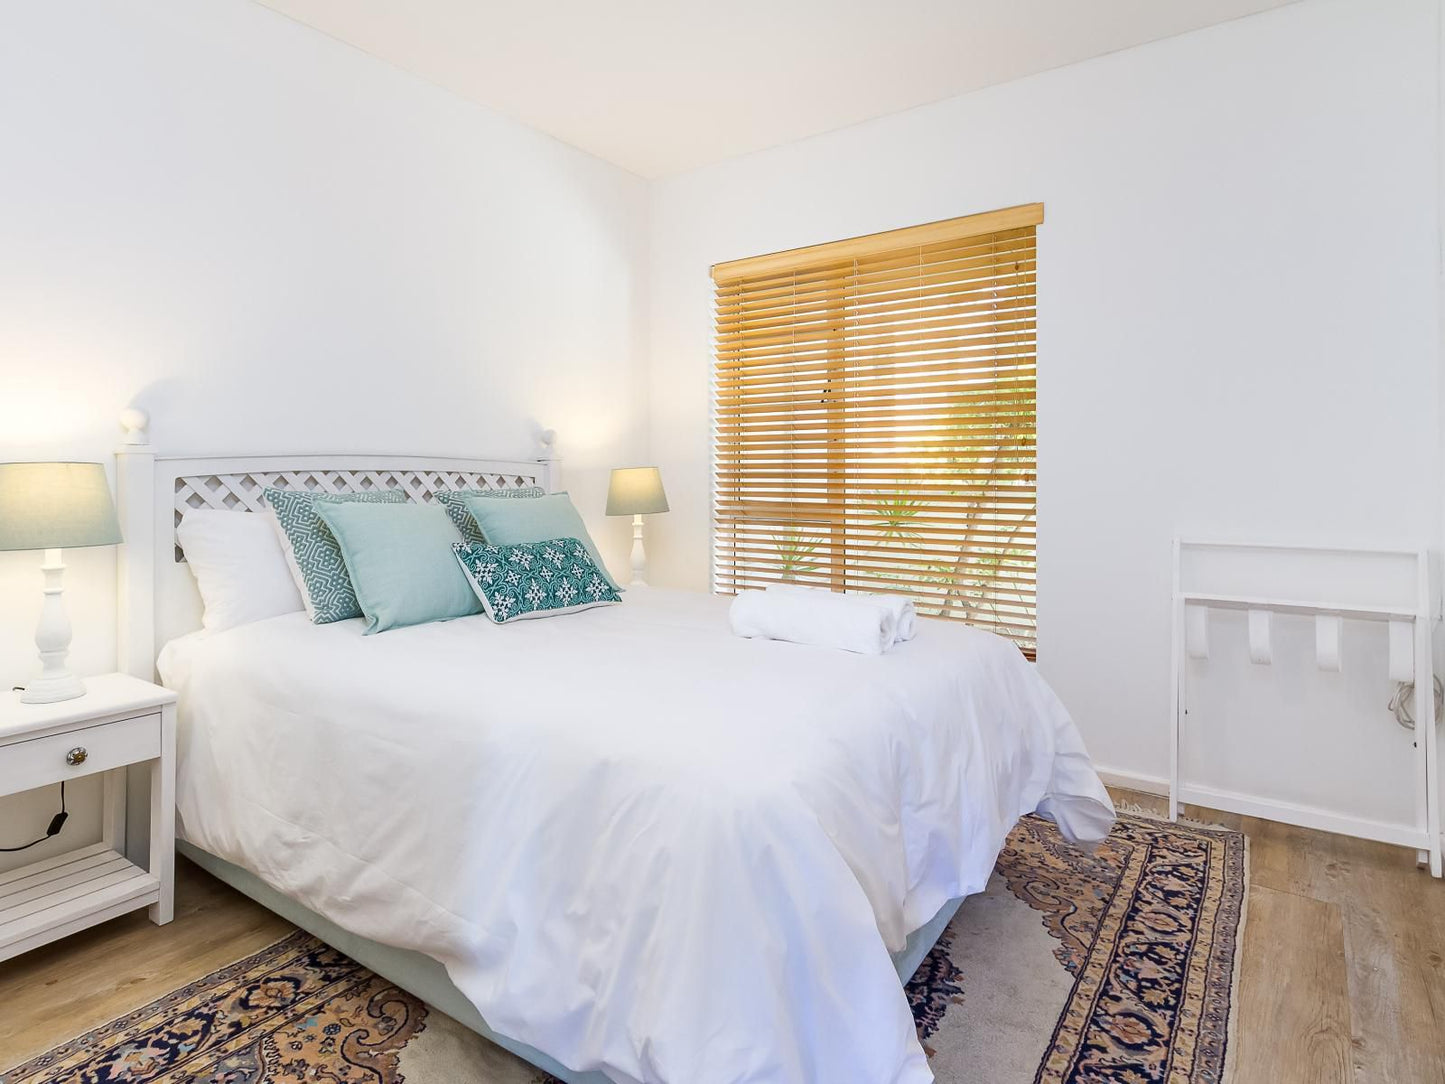 Dolphin Beach E35 By Hostagents Blouberg Cape Town Western Cape South Africa Bedroom